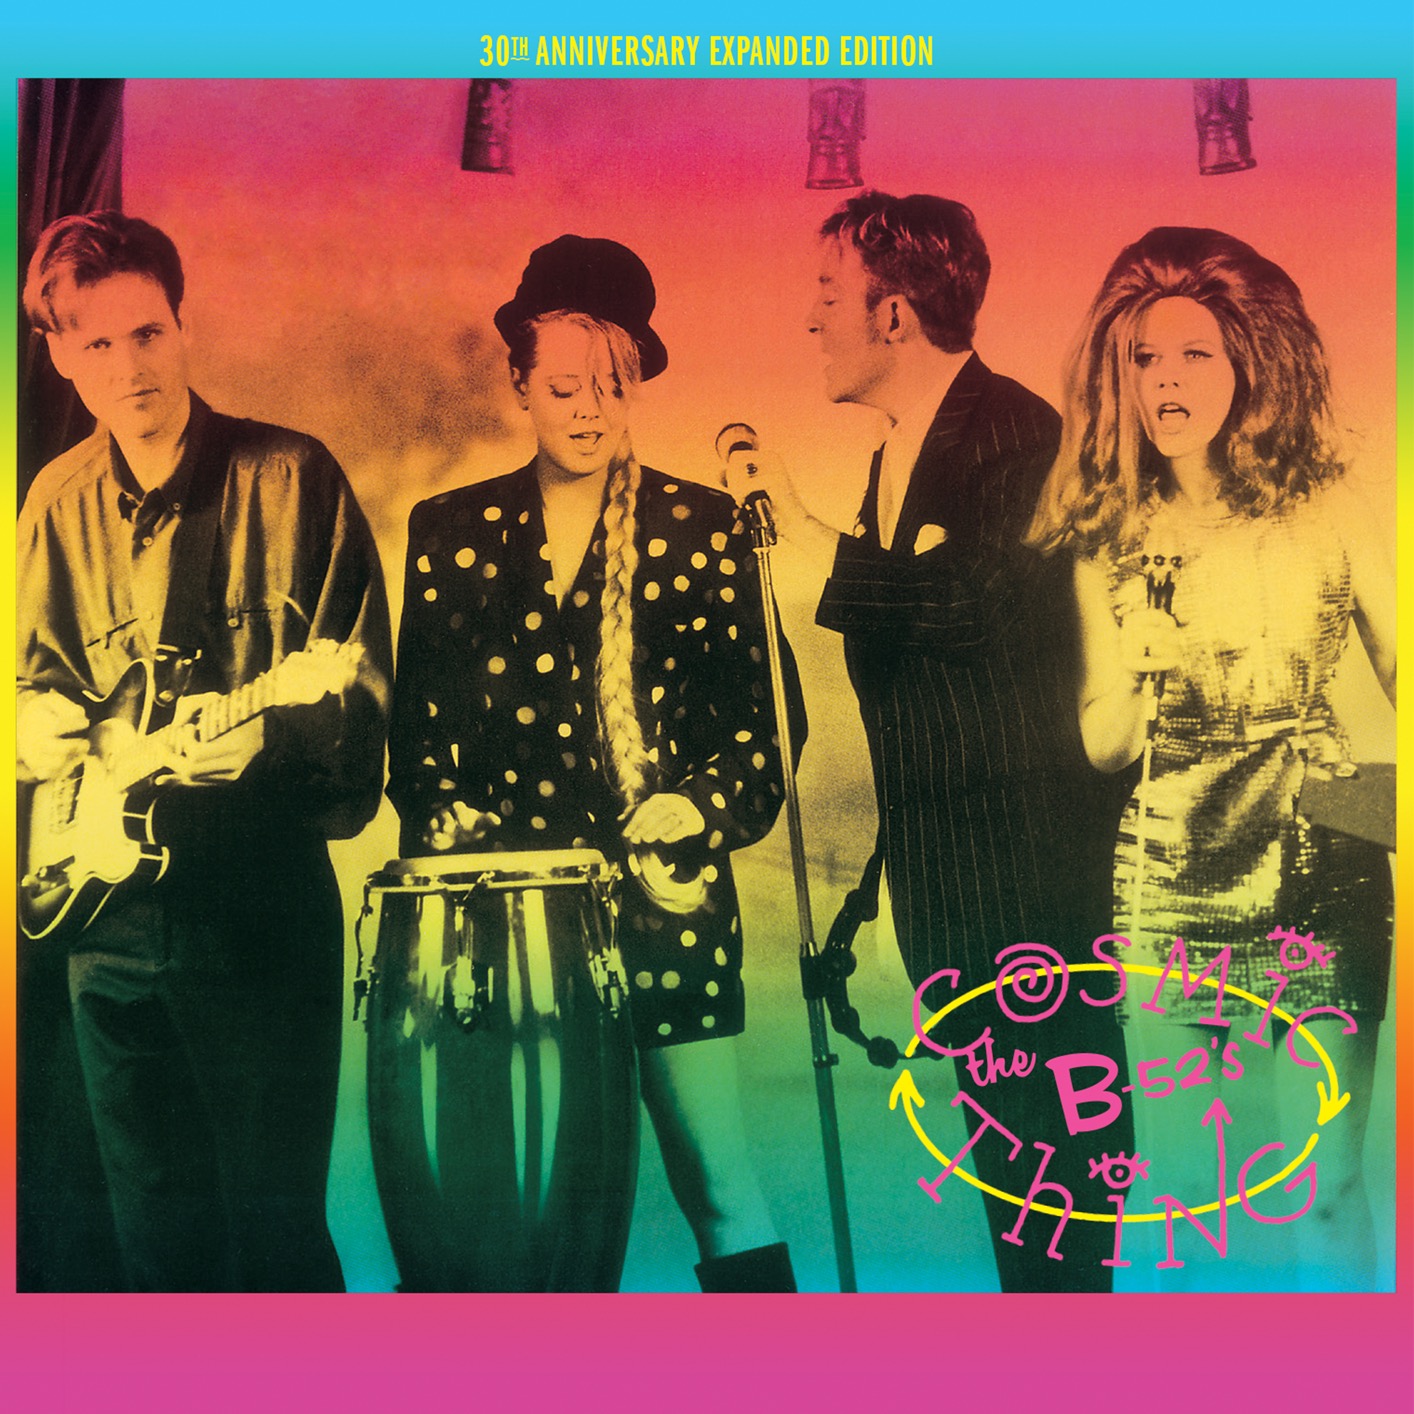 The B-52’s – Cosmic Thing (30th Anniversary Expanded Edition Remastered) (2019) [FLAC 24bit/96kHz]